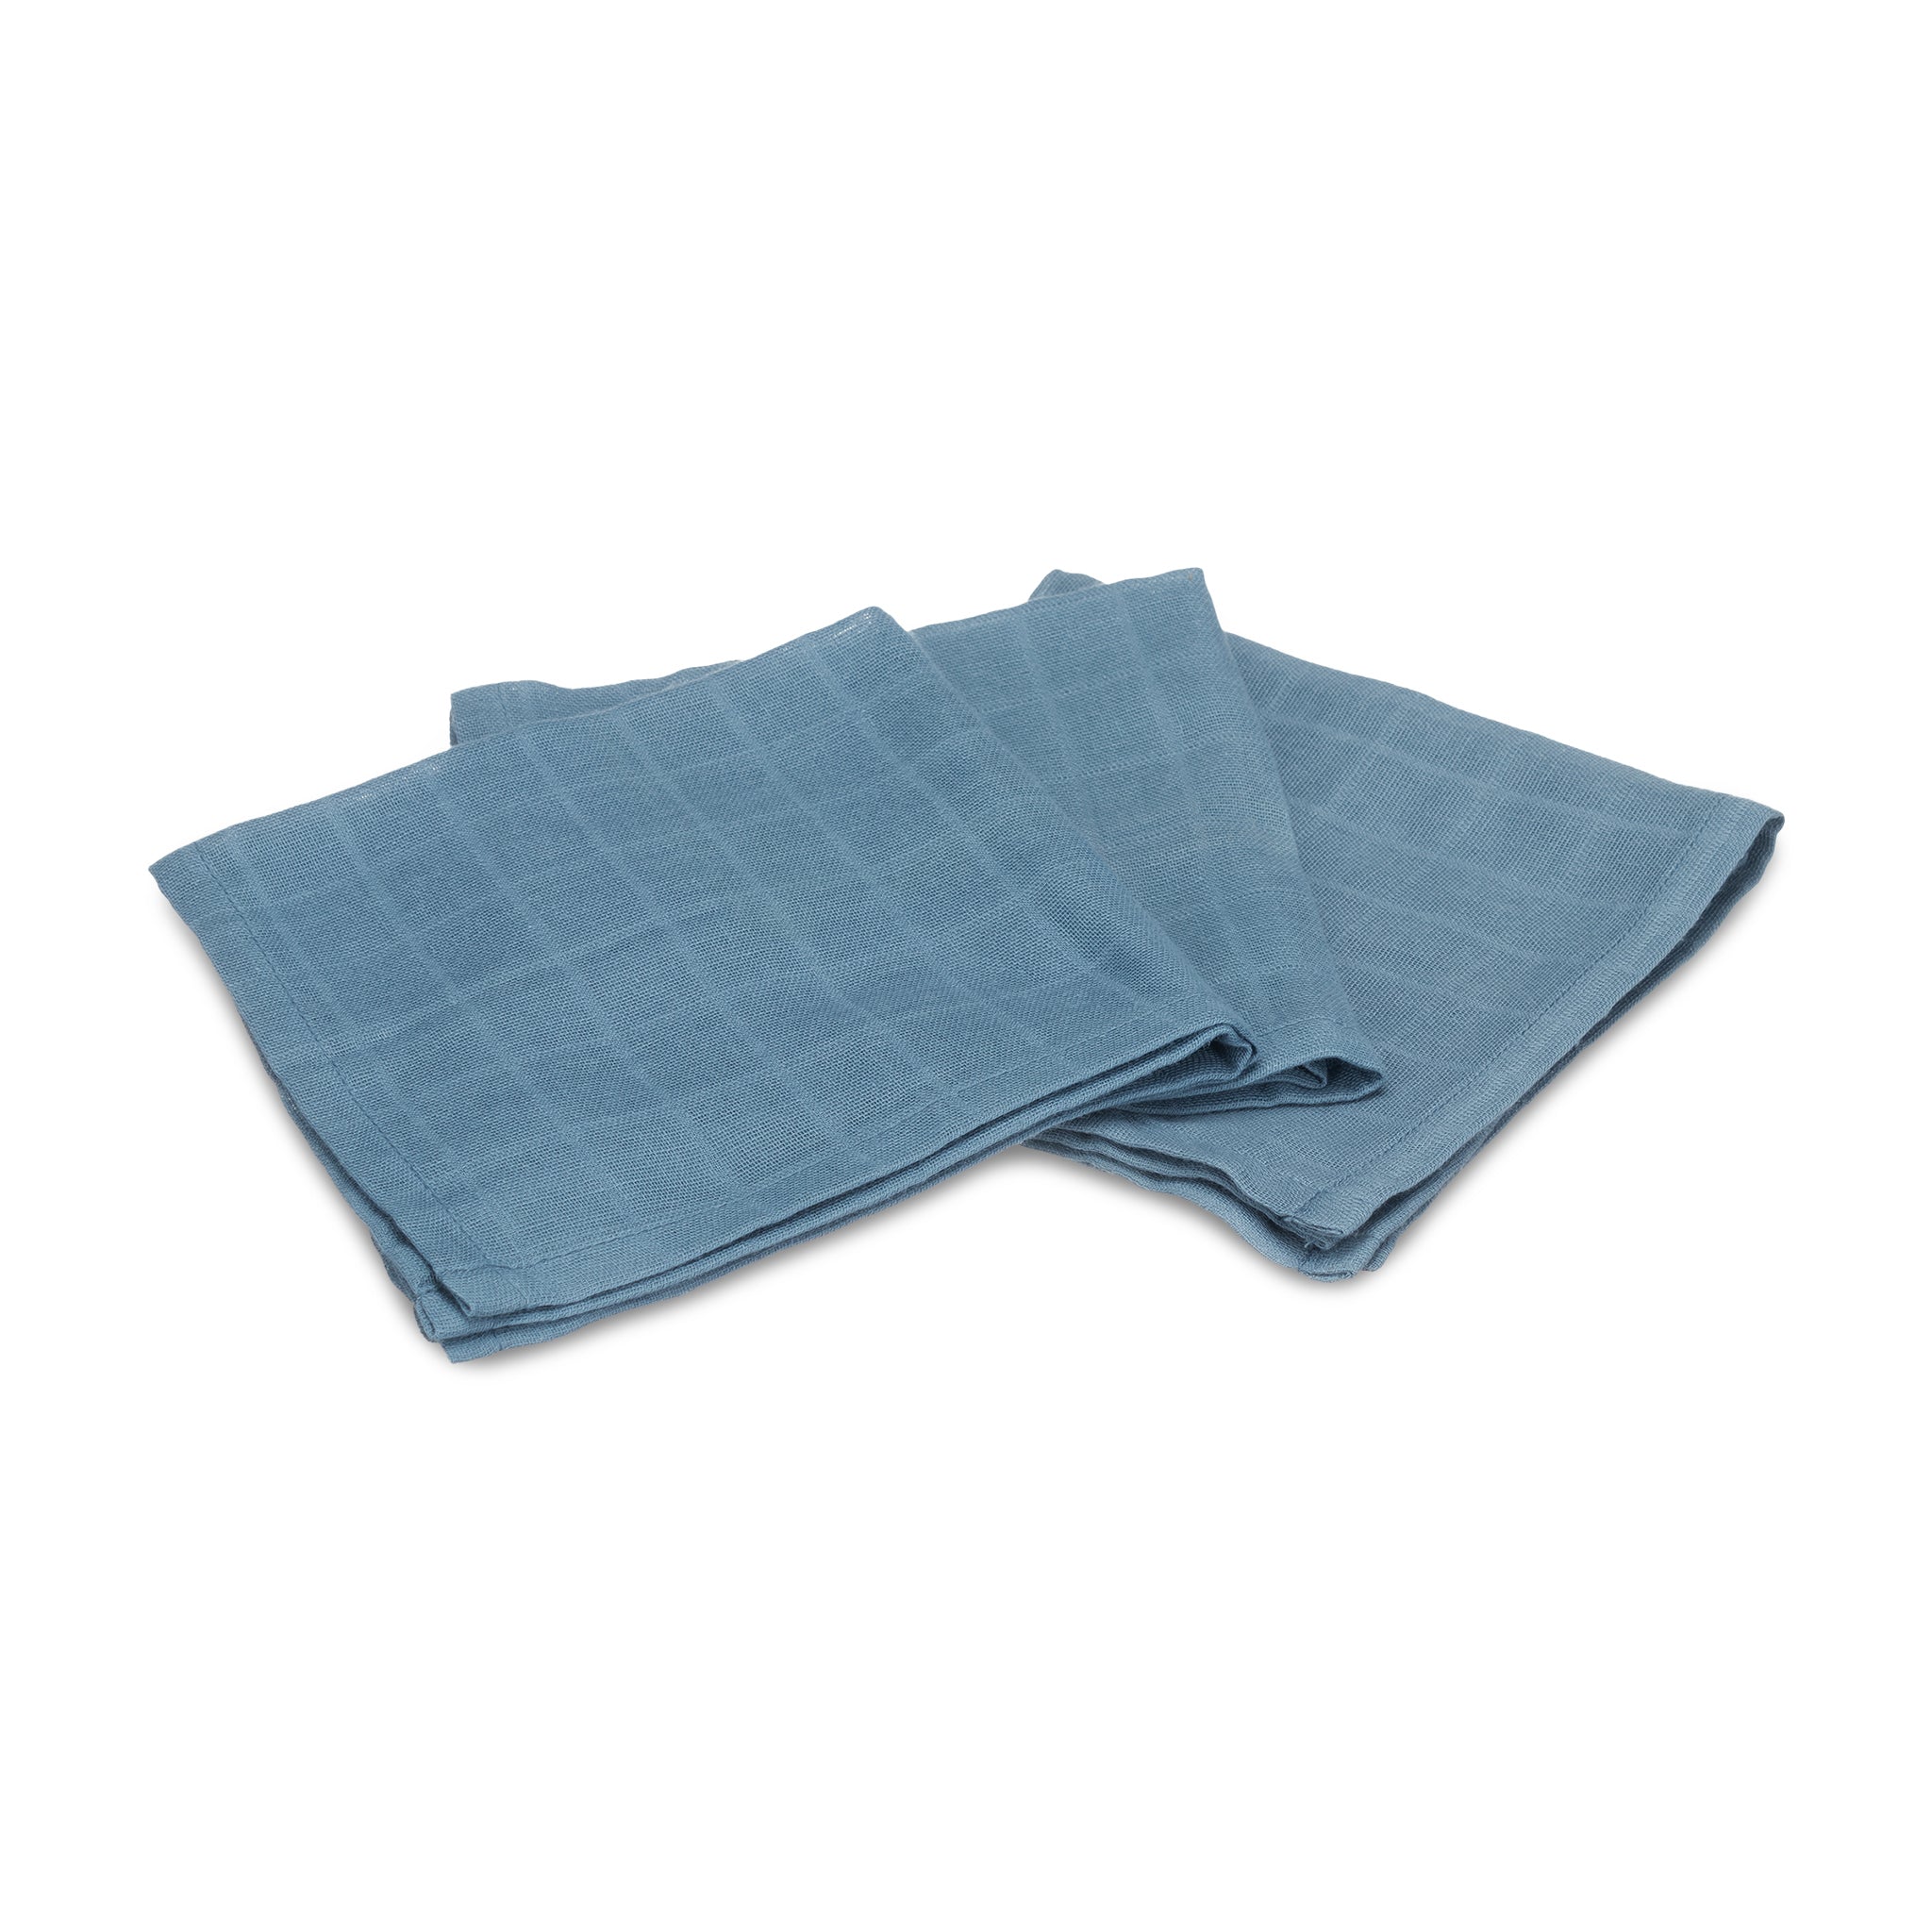 Disposable Dish Cloth, J Cloth, Reusable Cleaning Cloth Disposable